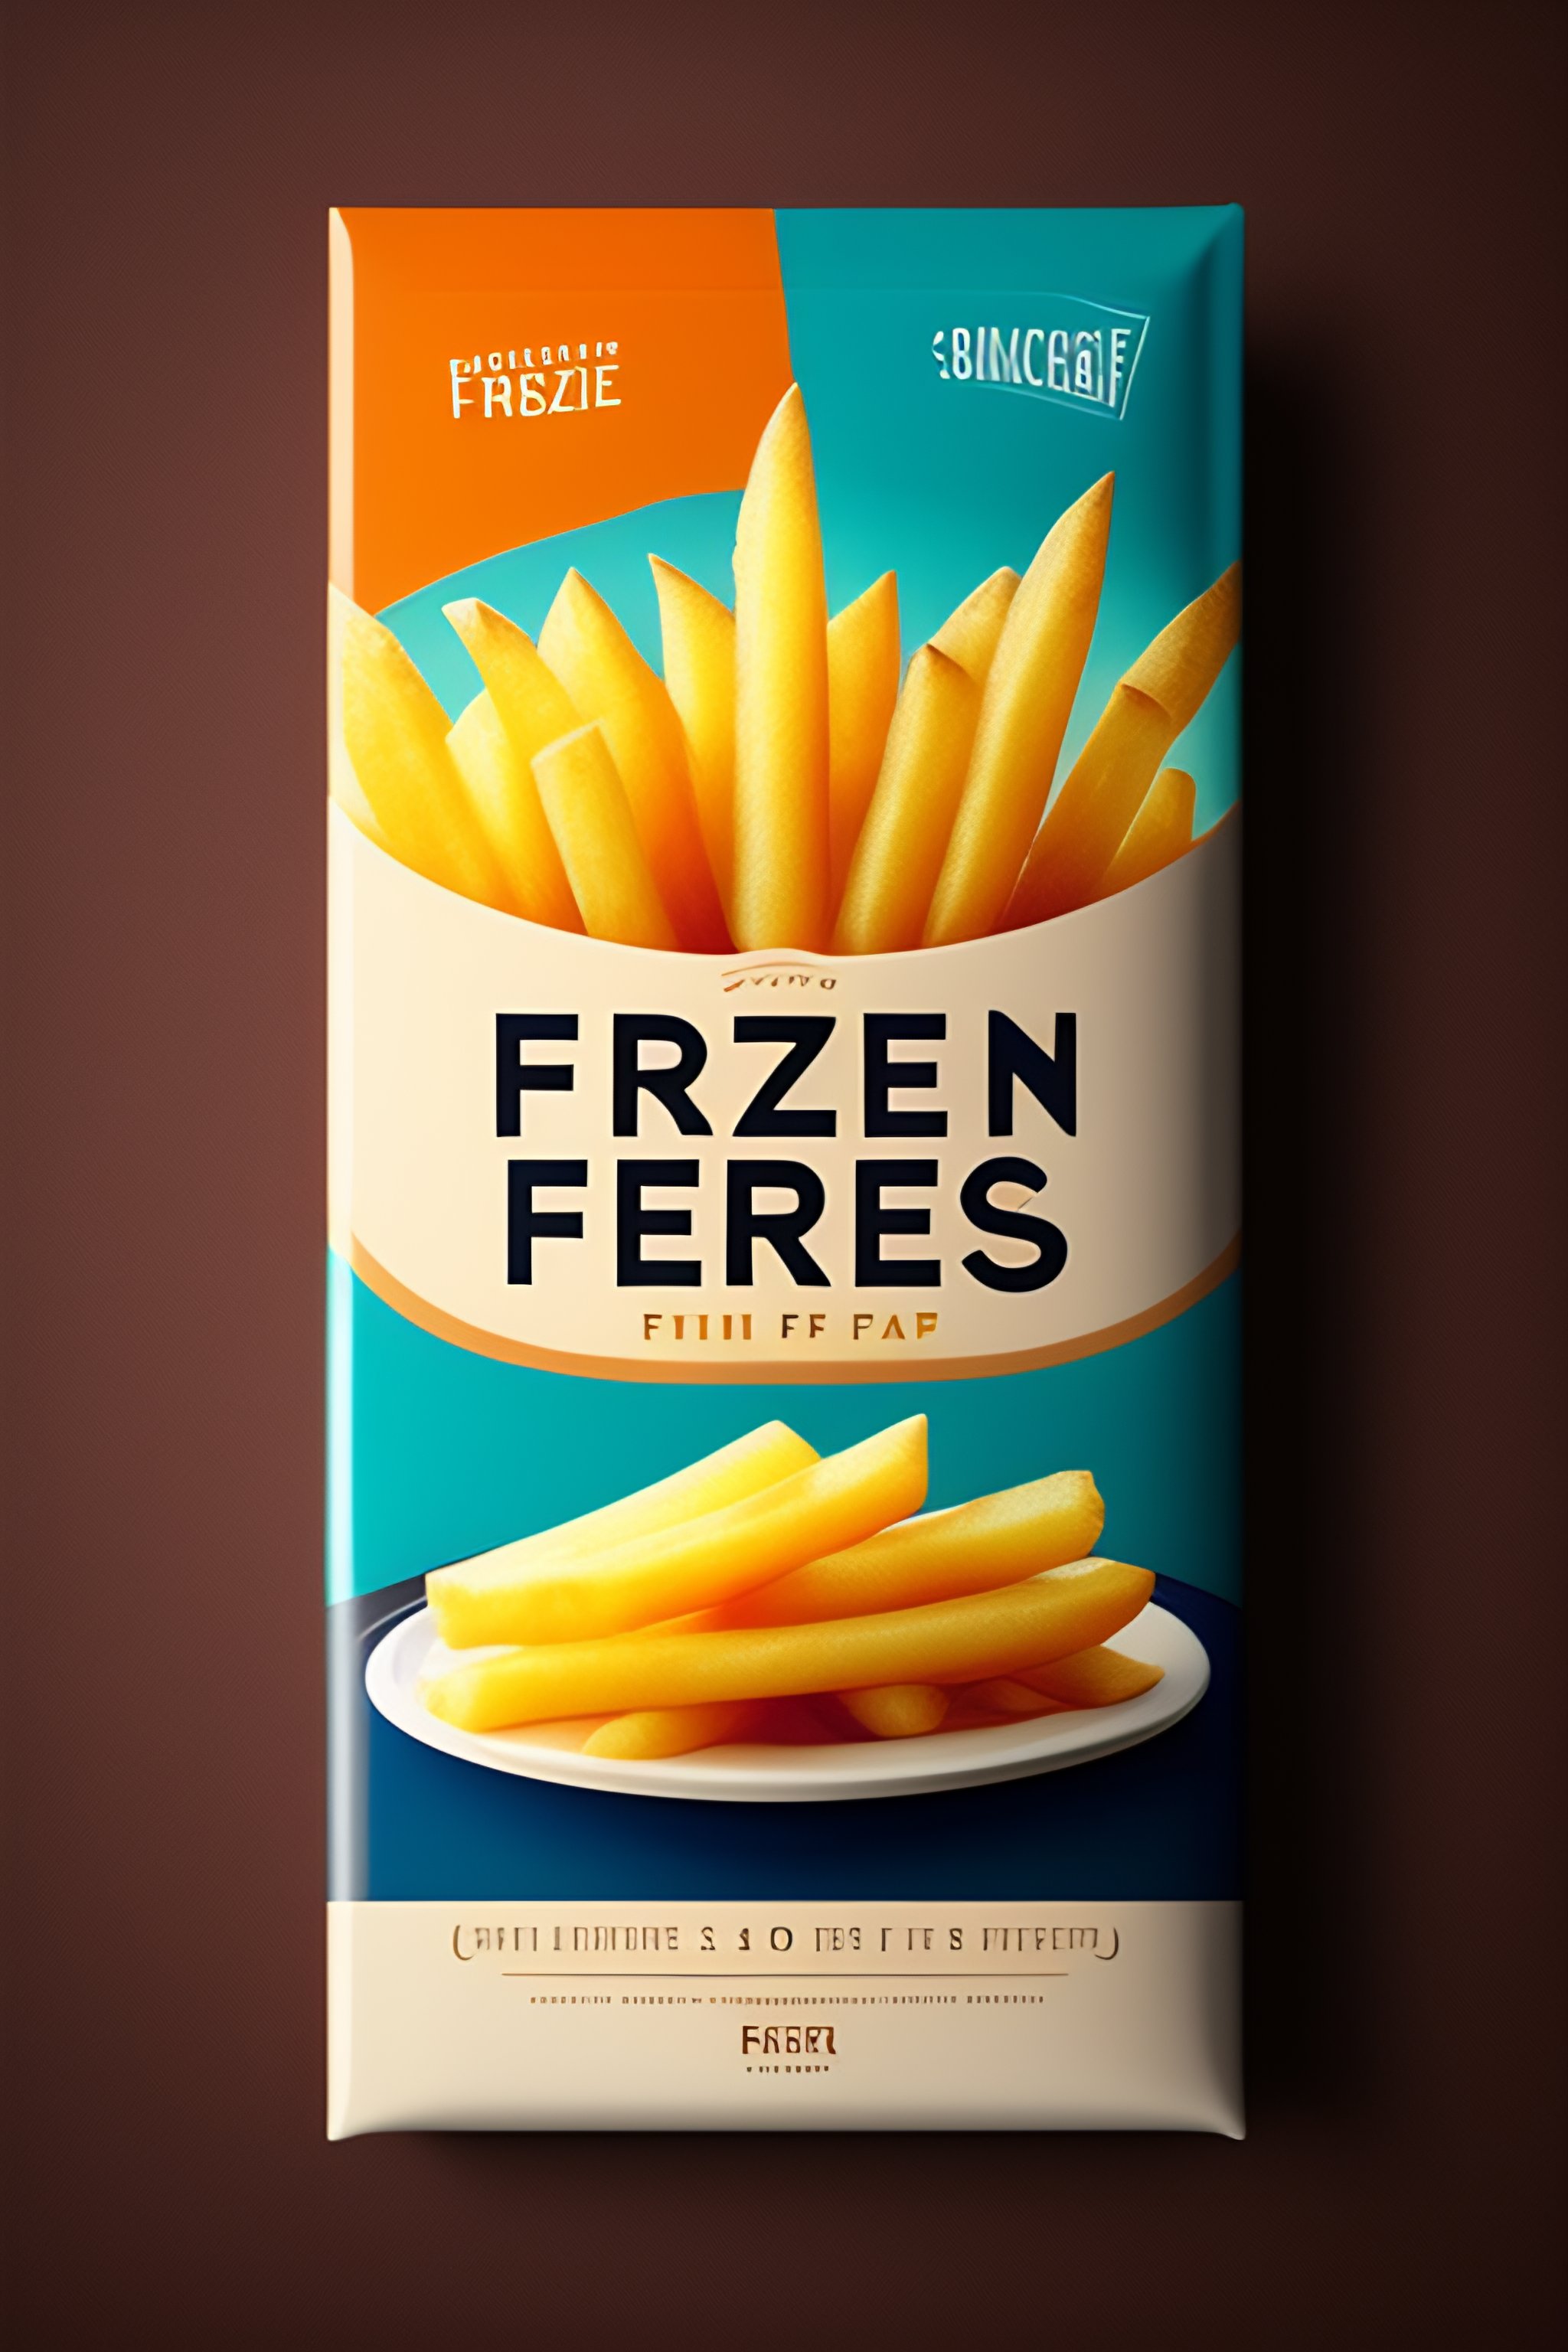 How the Frozen French Fries be Packaged?